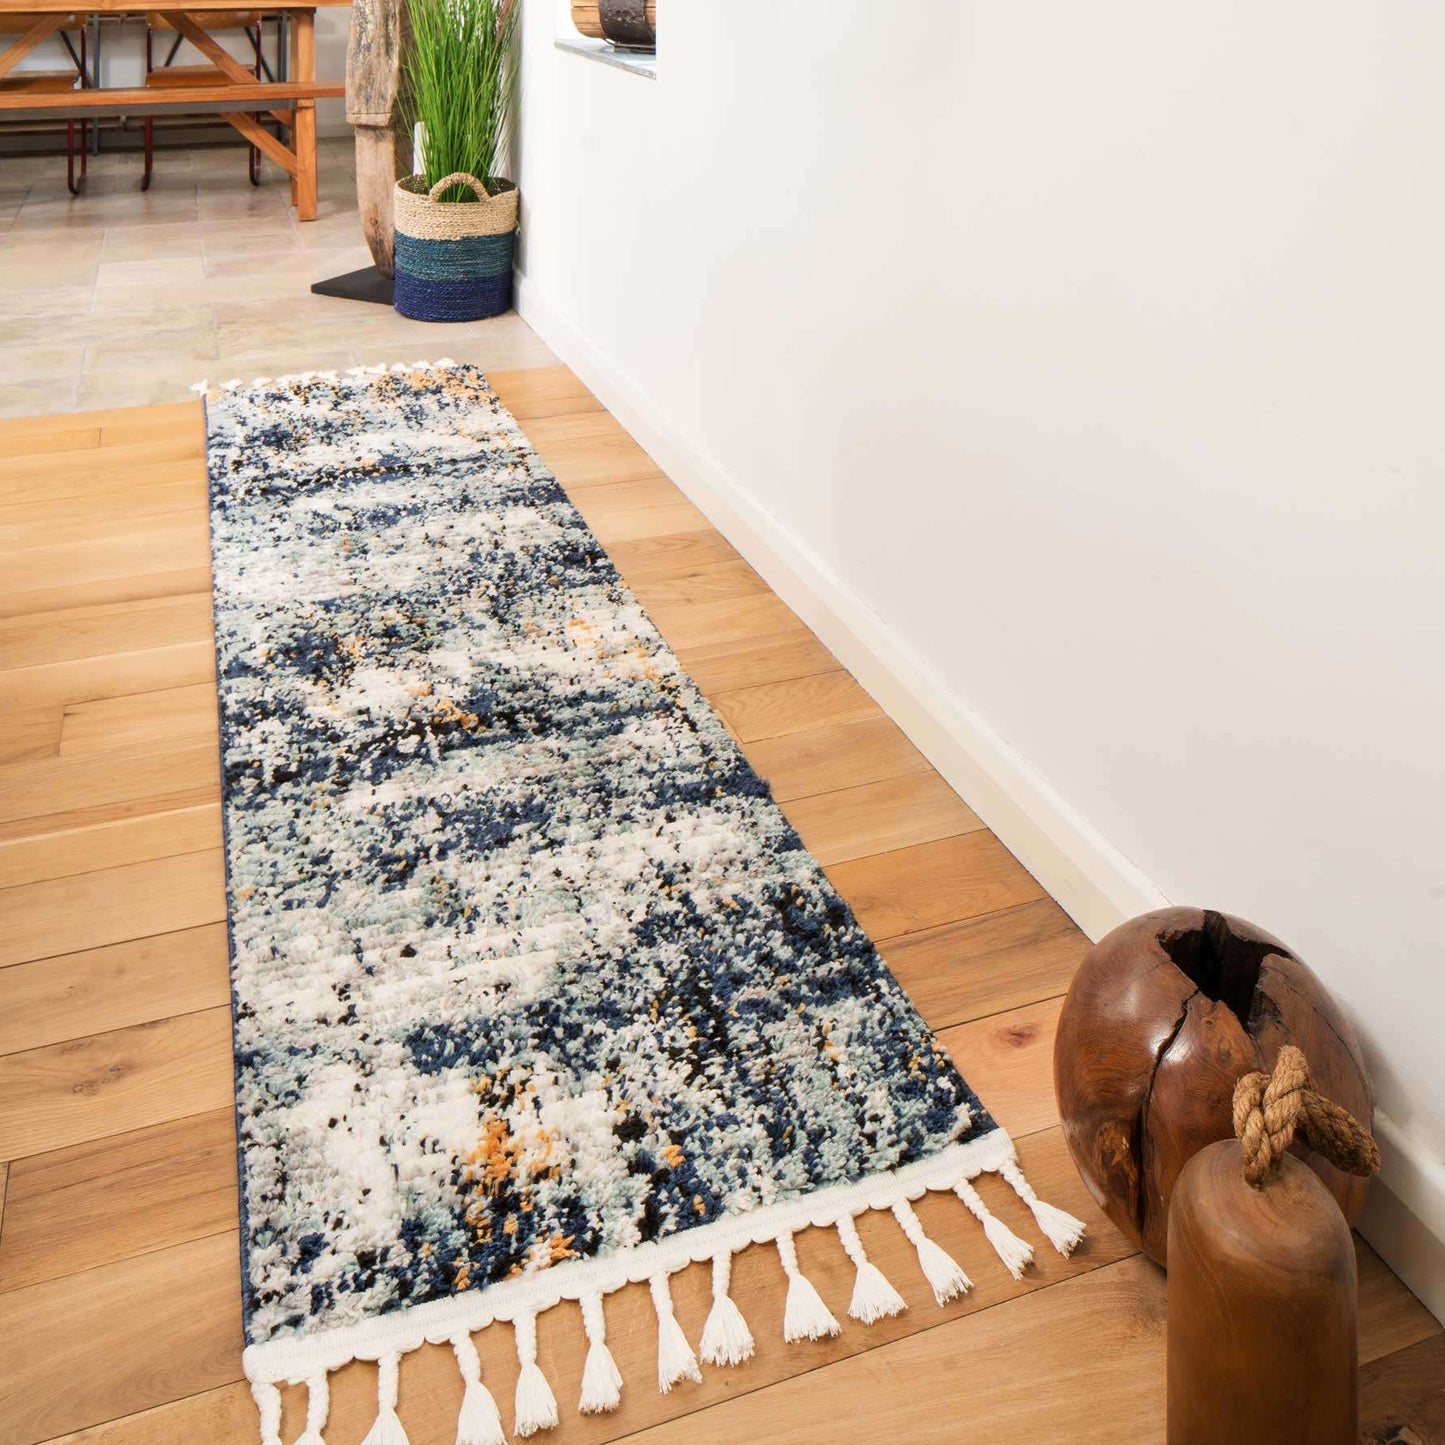 Blue Artwork Distressed Colourful Living Room Rugs